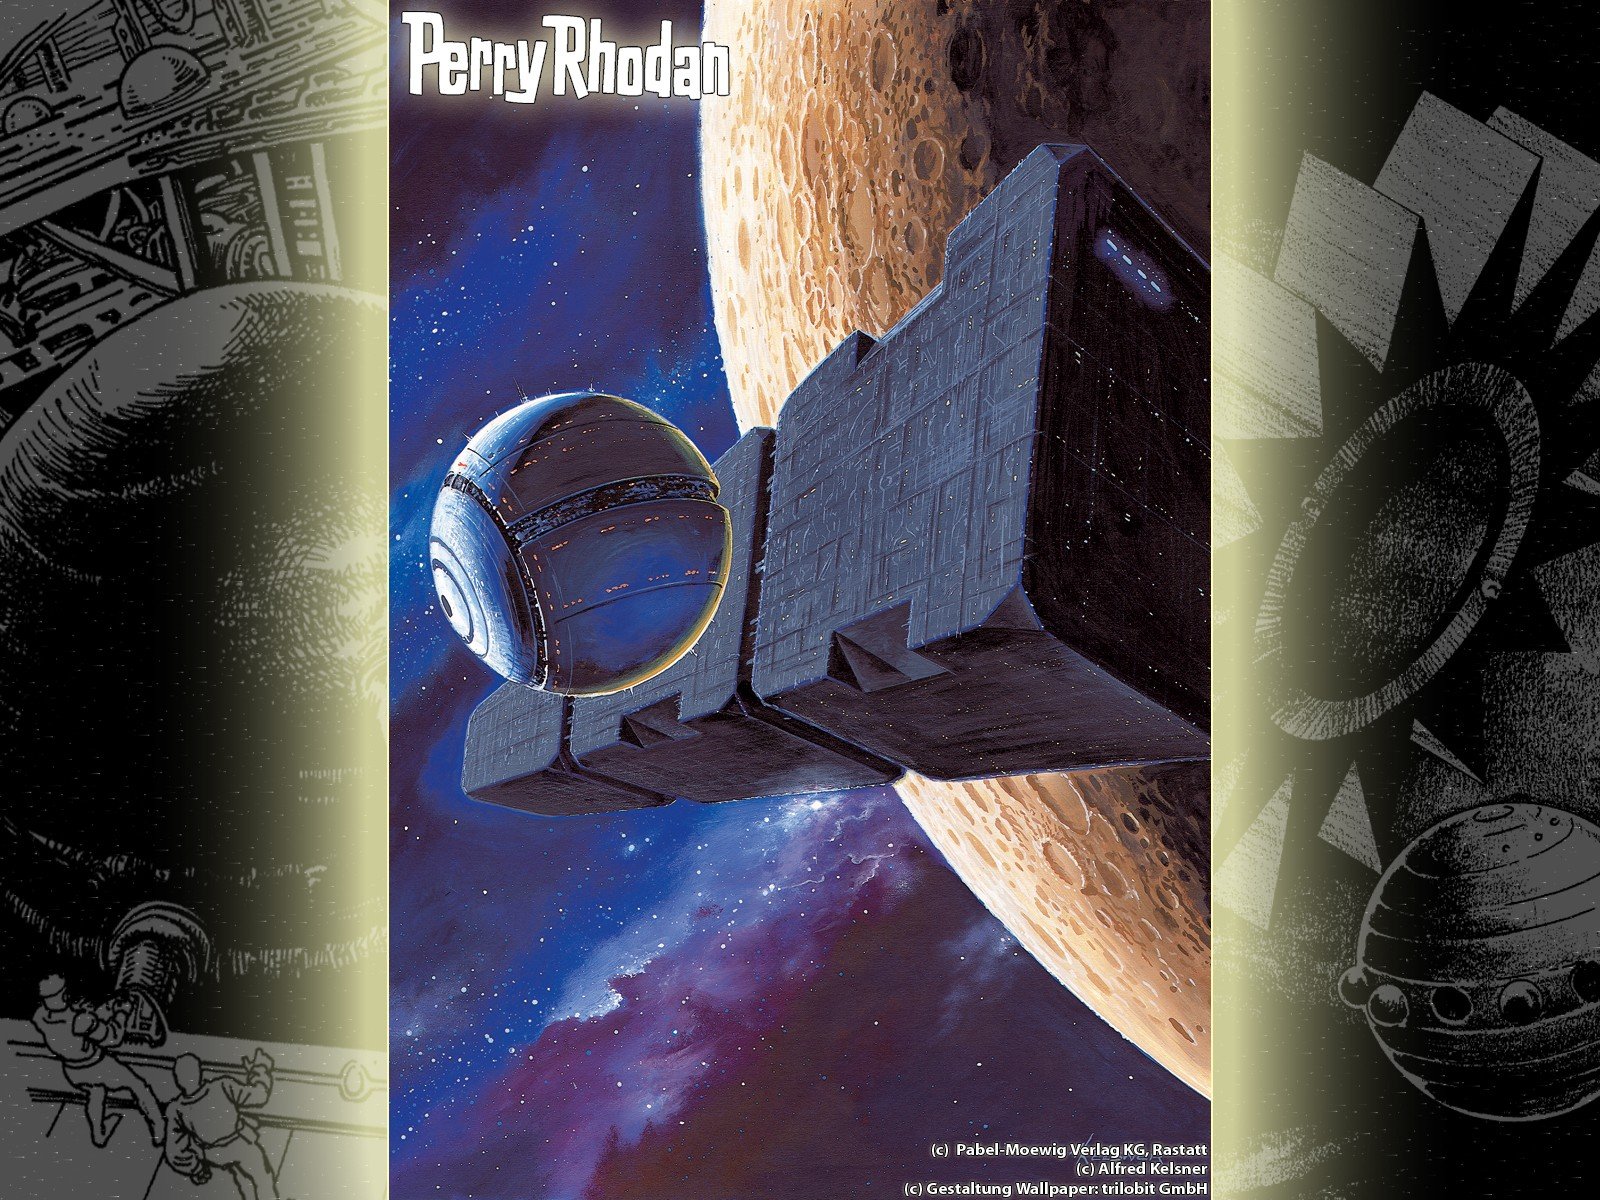 outer, Space, Magazines, Perry, Rhodan, Magazine, Covers Wallpaper